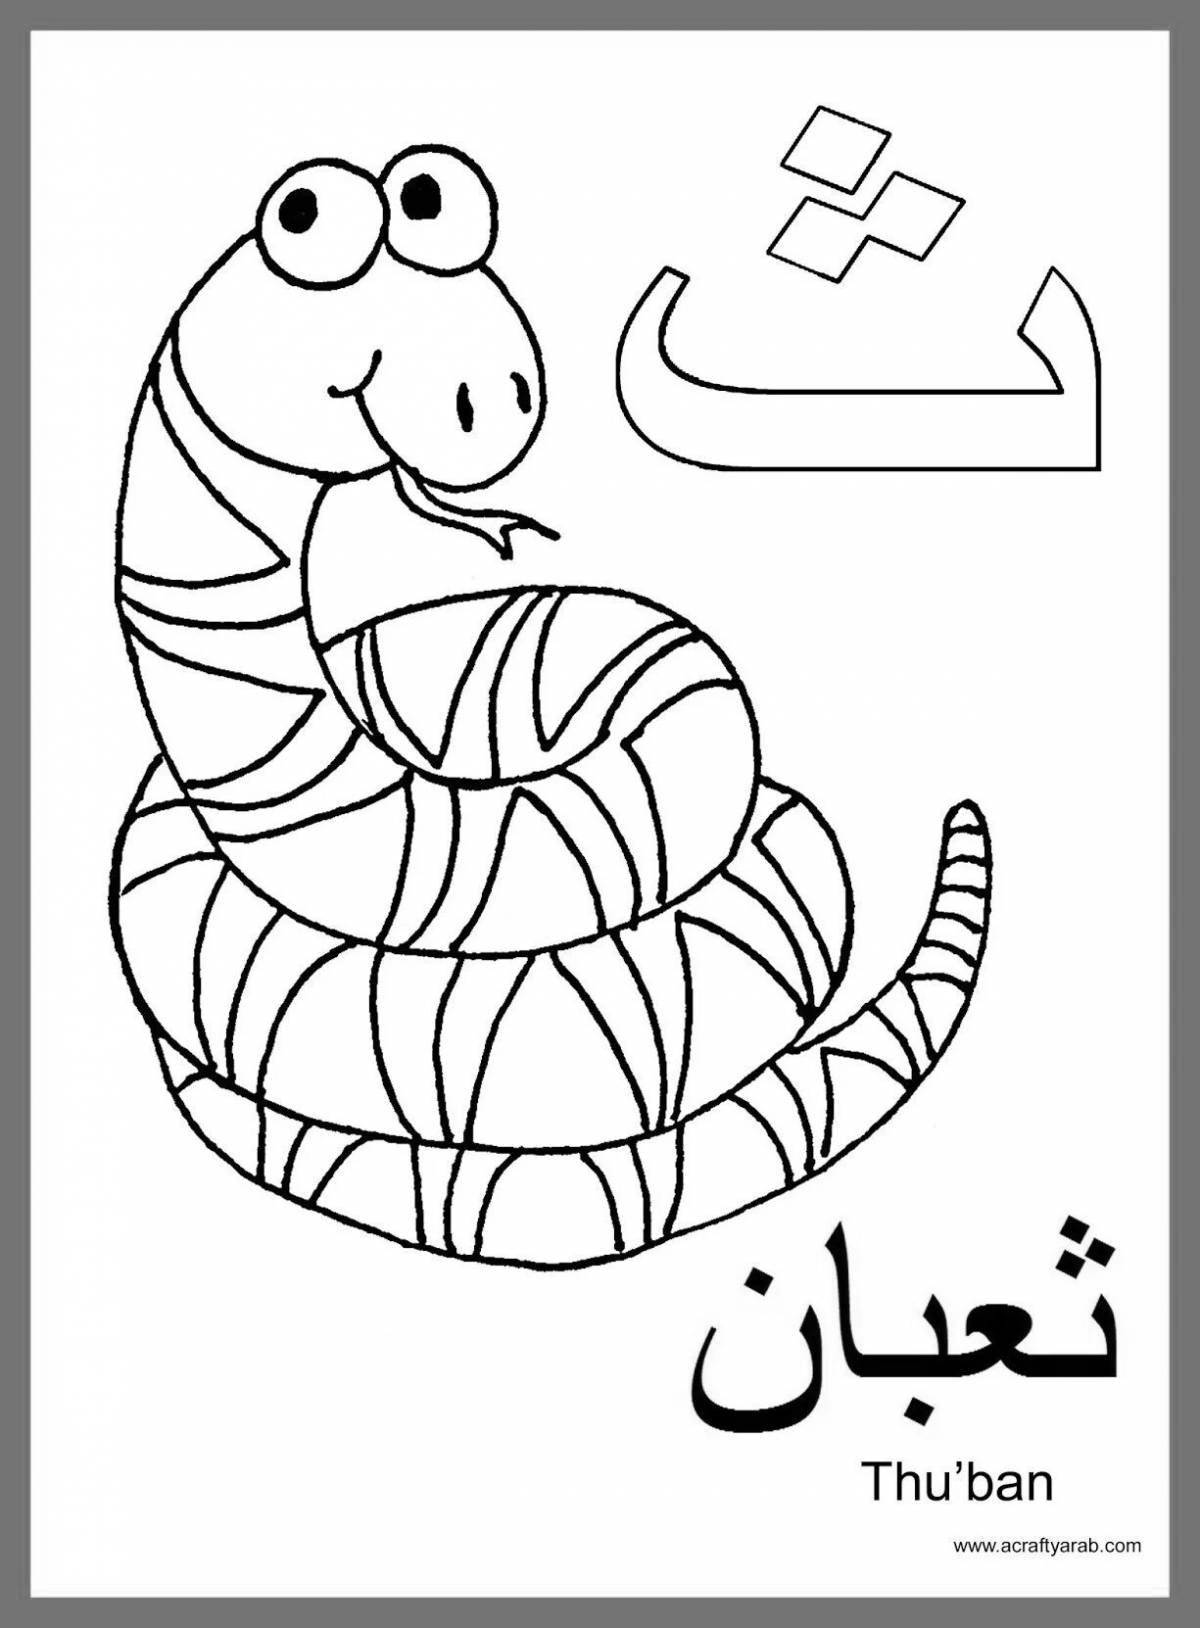 Colorful arabic coloring book for kids